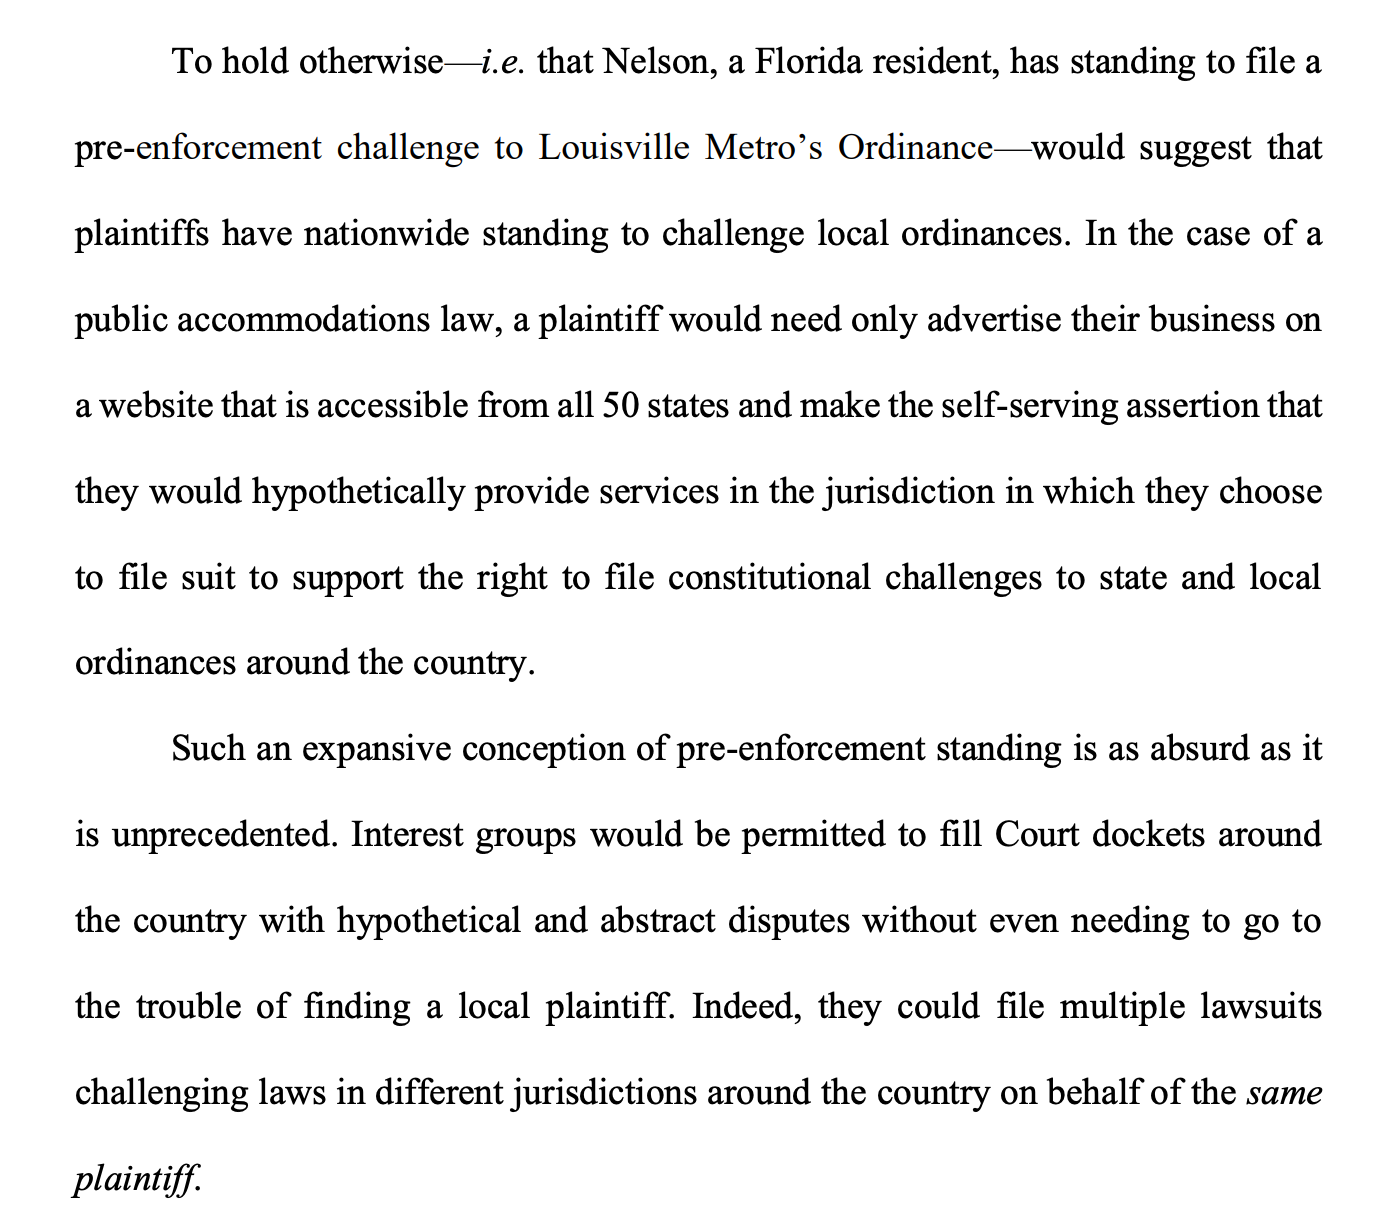 To hold otherwise—i.e. that Nelson, a Florida resident, has standing to file a pre-enforcement challenge to Louisville Metro’s Ordinance—would suggest that plaintiffs have nationwide standing to challenge local ordinances. In the case of a public accommodations law, a plaintiff would need only advertise their business on a website that is accessible from all 50 states and make the self-serving assertion that they would hypothetically provide services in the jurisdiction in which they choose to file suit to support the right to file constitutional challenges to state and local ordinances around the country. Such an expansive conception of pre-enforcement standing is as absurd as it is unprecedented. Interest groups would be permitted to fill Court dockets around the country with hypothetical and abstract disputes without even needing to go to the trouble of finding a local plaintiff. Indeed, they could file multiple lawsuits challenging laws in different jurisdictions around the country on behalf of the same plaintiff. 